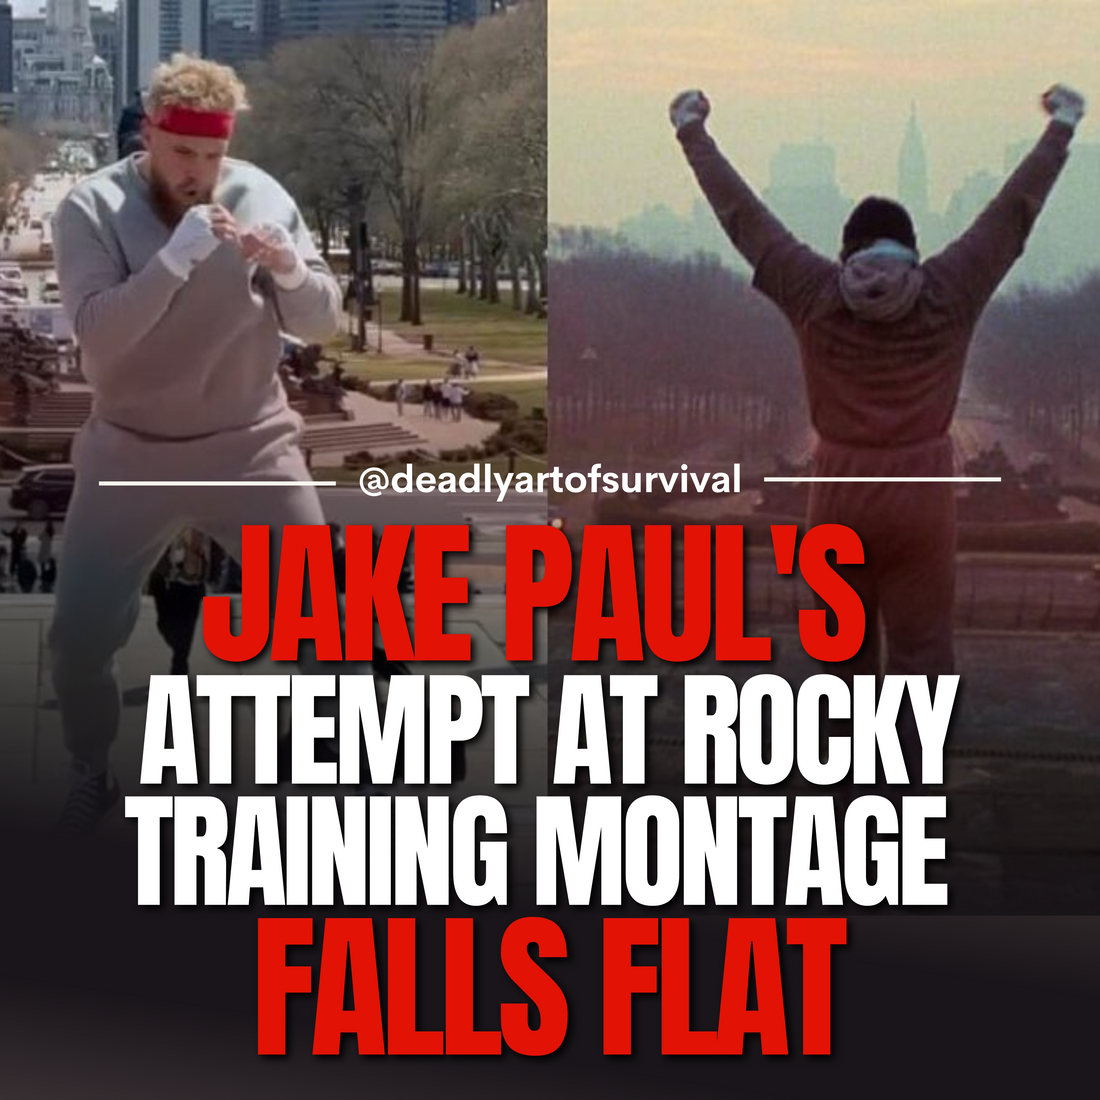 Jake-Paul-s-Attempt-at-Rocky-Training-Montage-Falls-Flat-with-Fans-and-Fails-to-Rattle-Mike-Tyson deadlyartofsurvival.com